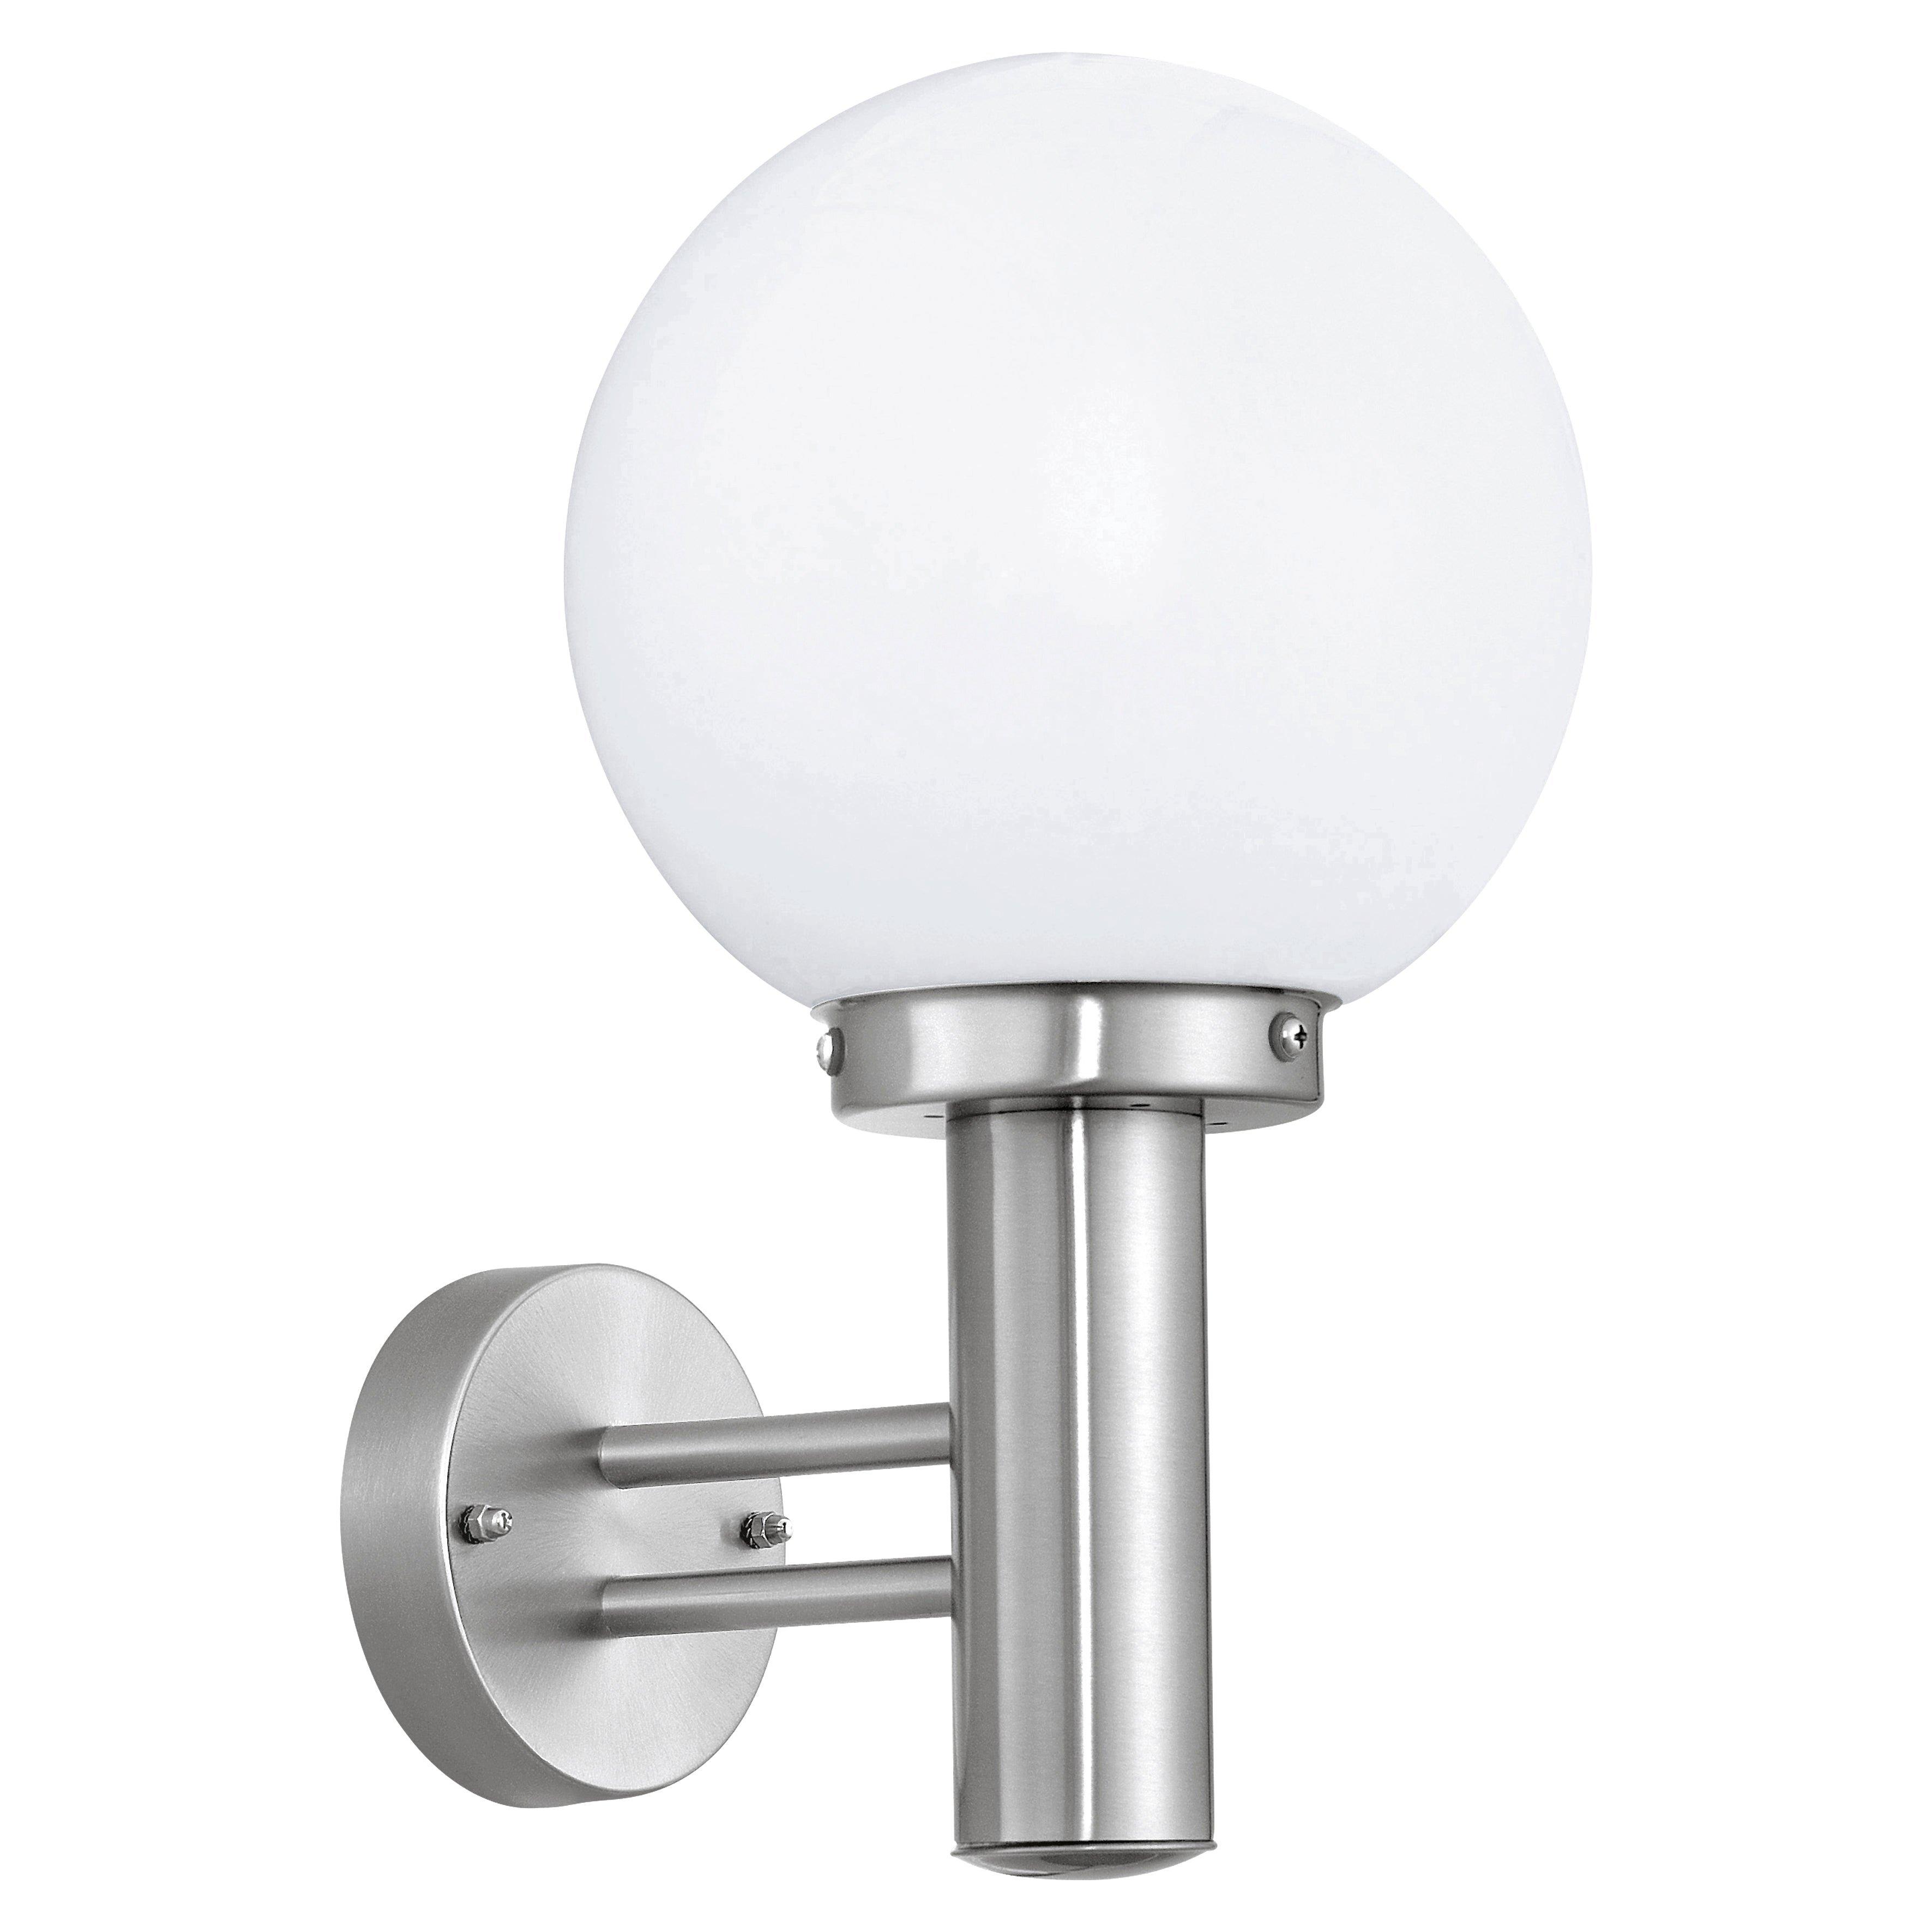 IP44 Outdoor Wall Light Stainless Steel Orb Shade 1x 60W E27 Bulb Porch Lamp